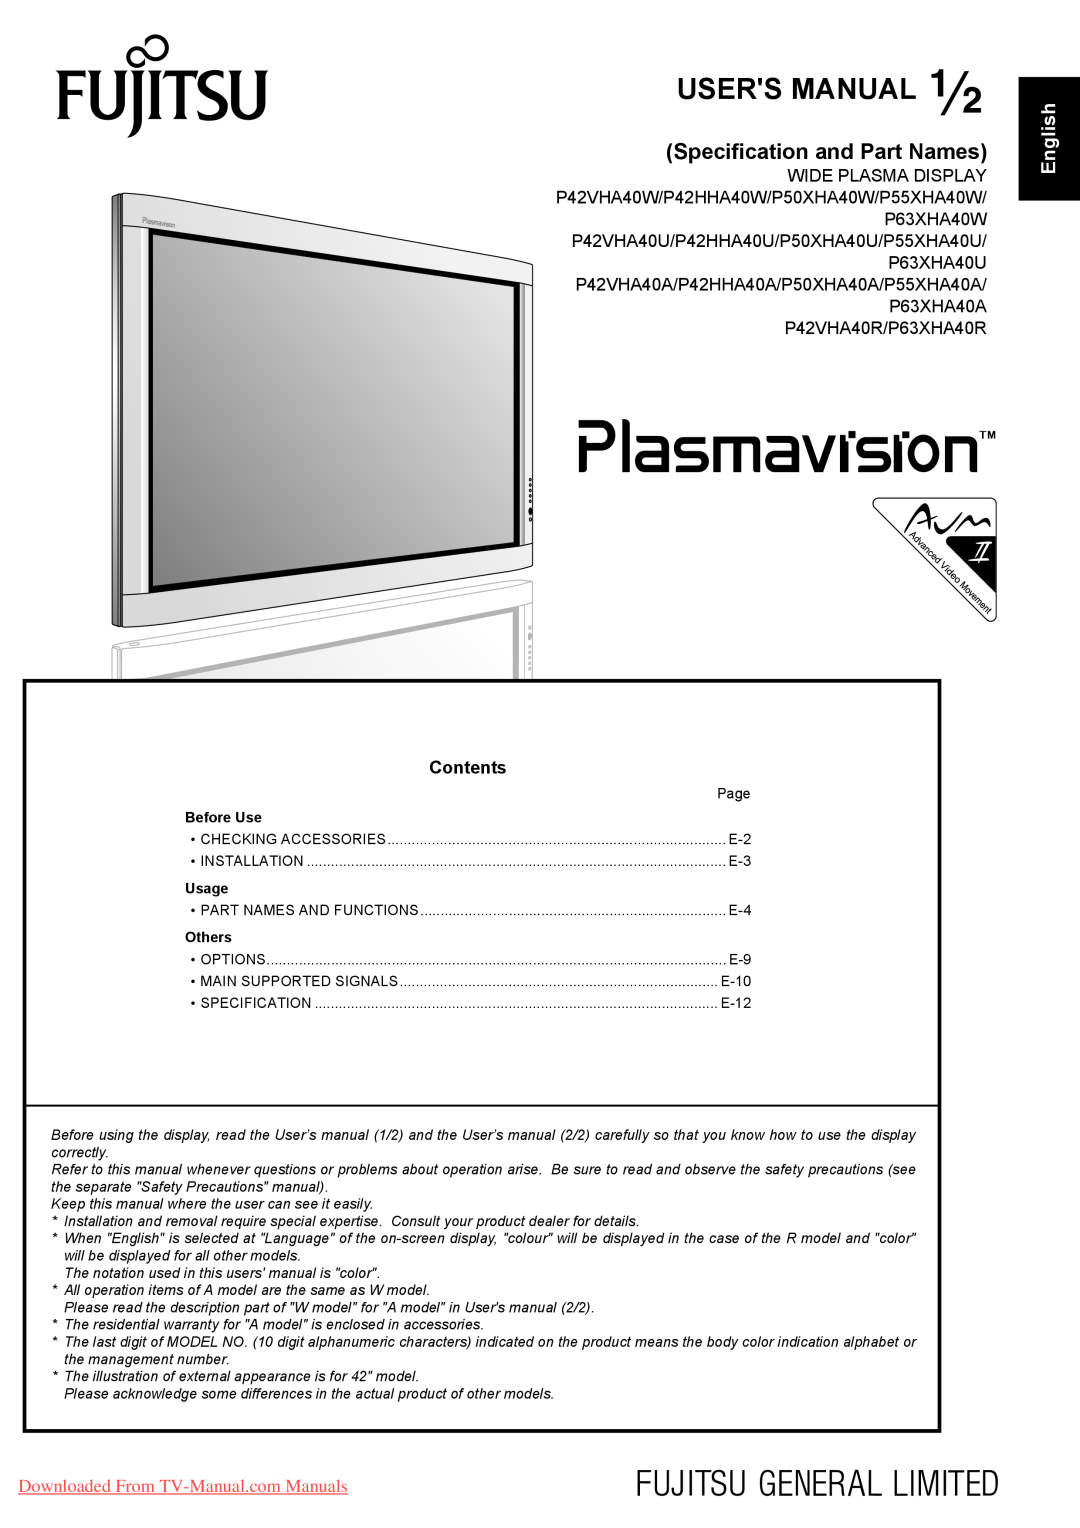 Fujitsu P42HHA40W user manual Users Manual, Specification and Part Names, ÷-Œƒ, 日 本 語, Contents, Before Use, Usage, Others 